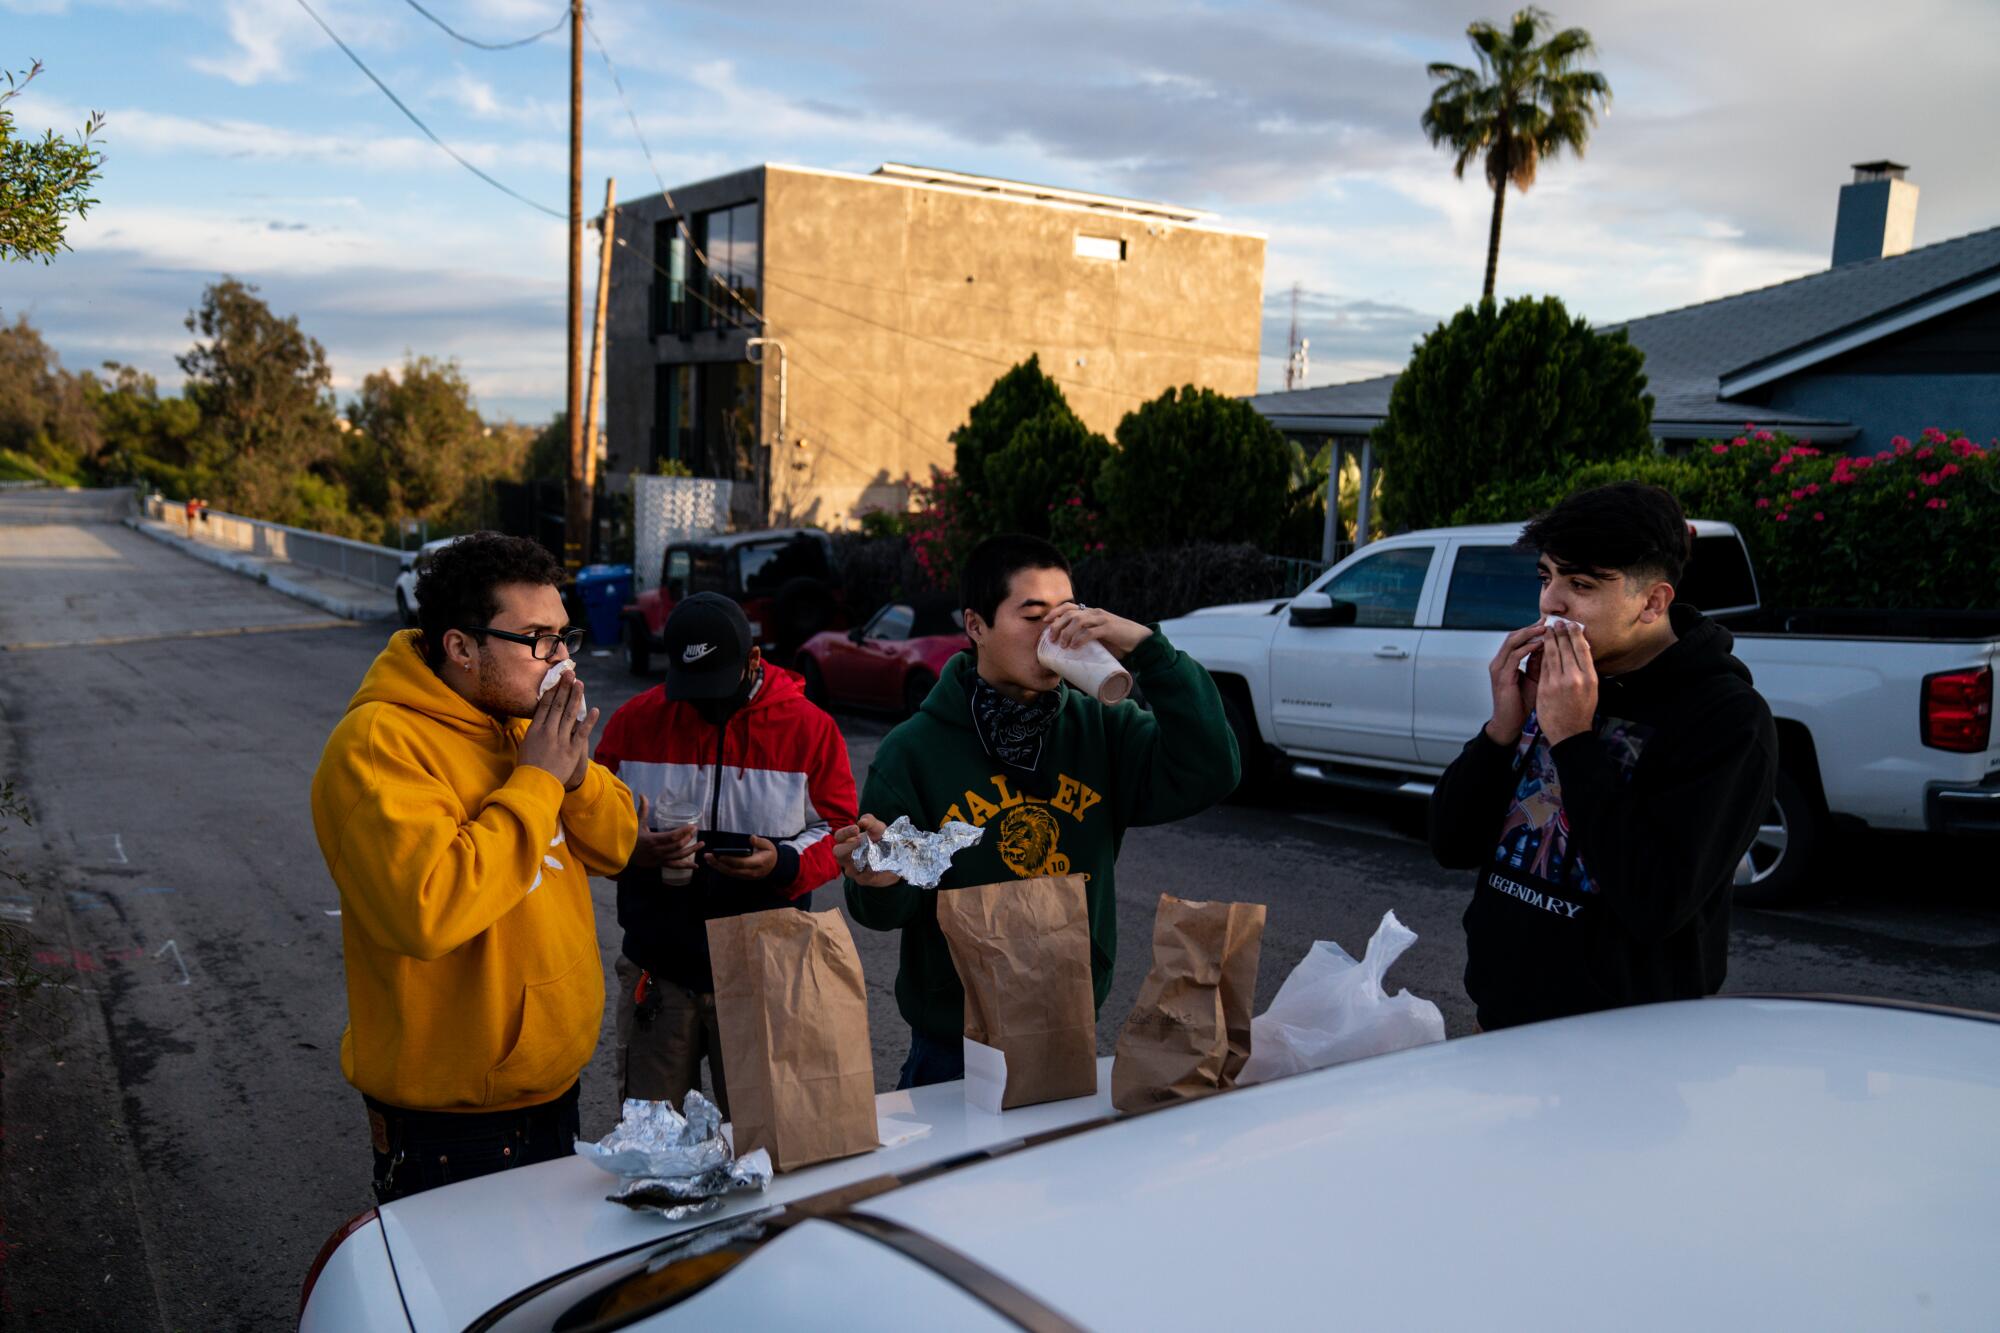 Anthony Calderon, 22, of Echo Park, David Escalante, 19, of Koreatown, Yun Park, 21, of Koreatown, and Antoine Montero, 19, of Los Feliz, eat food from Guisados on the trunk of a car in the Elysian Park neighborhood April 10 in Los Angeles.